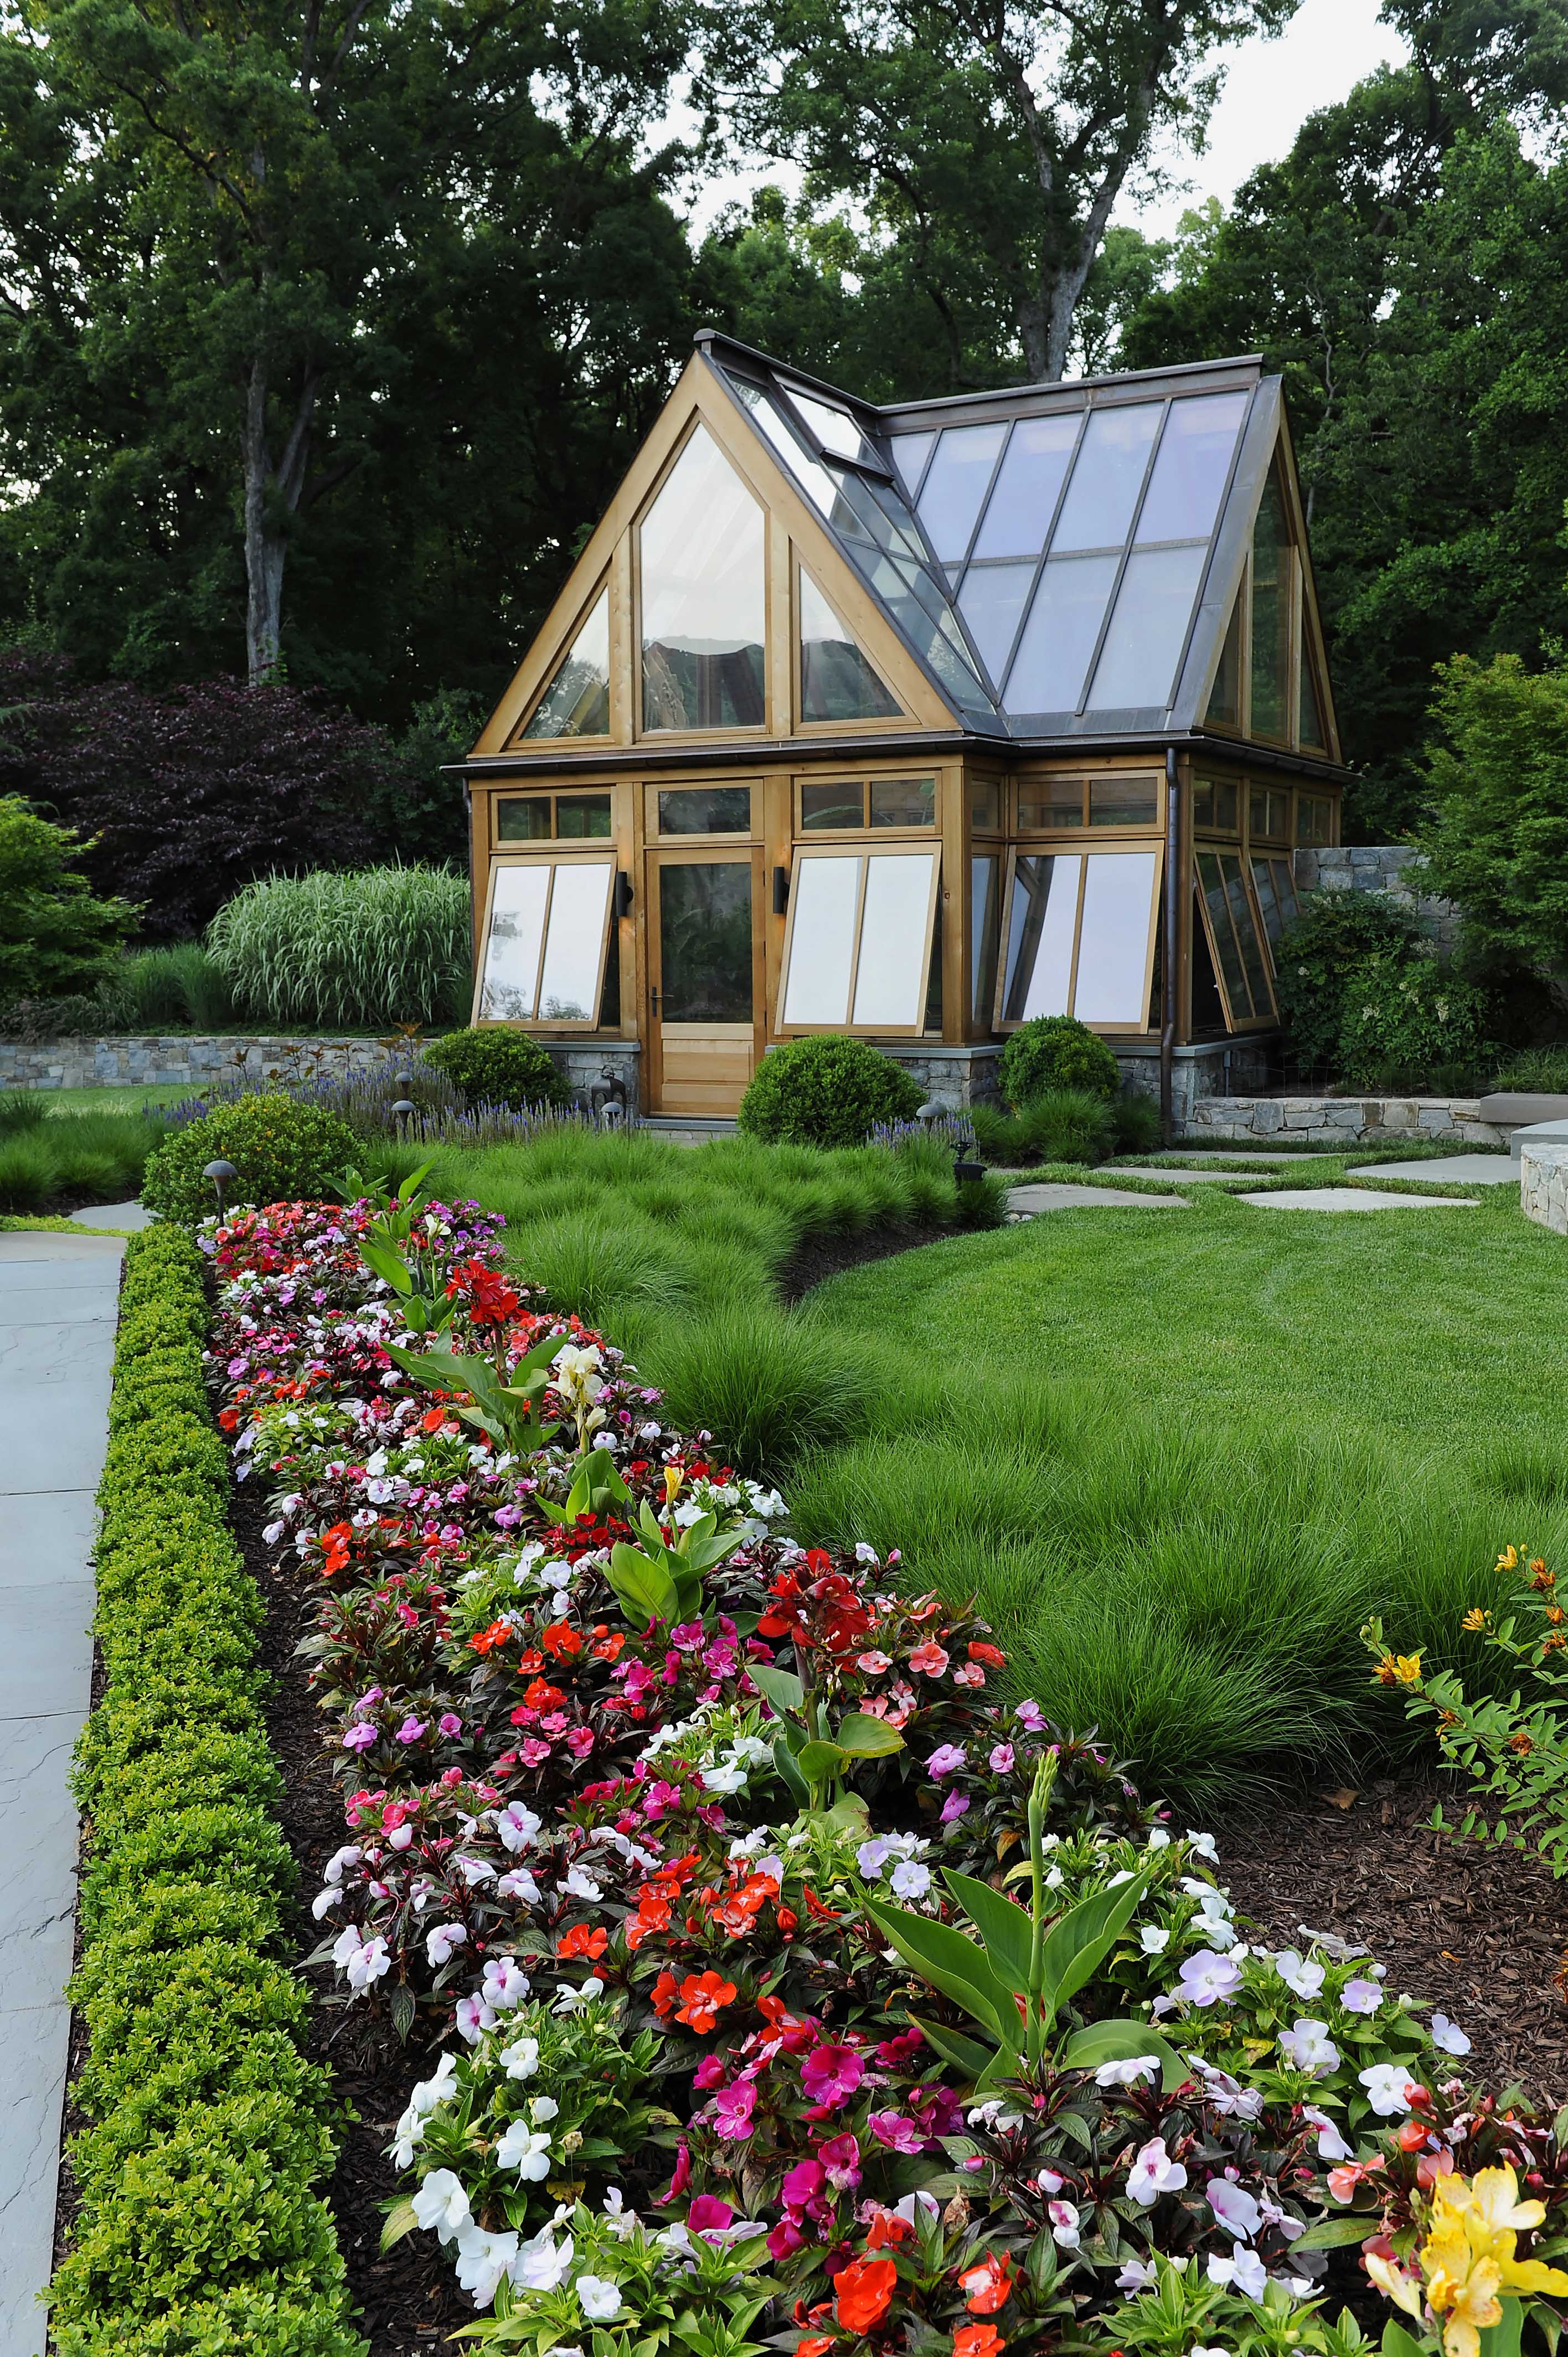 Custom Greenhouses and Gardens: Common Misconceptions Uncovered!